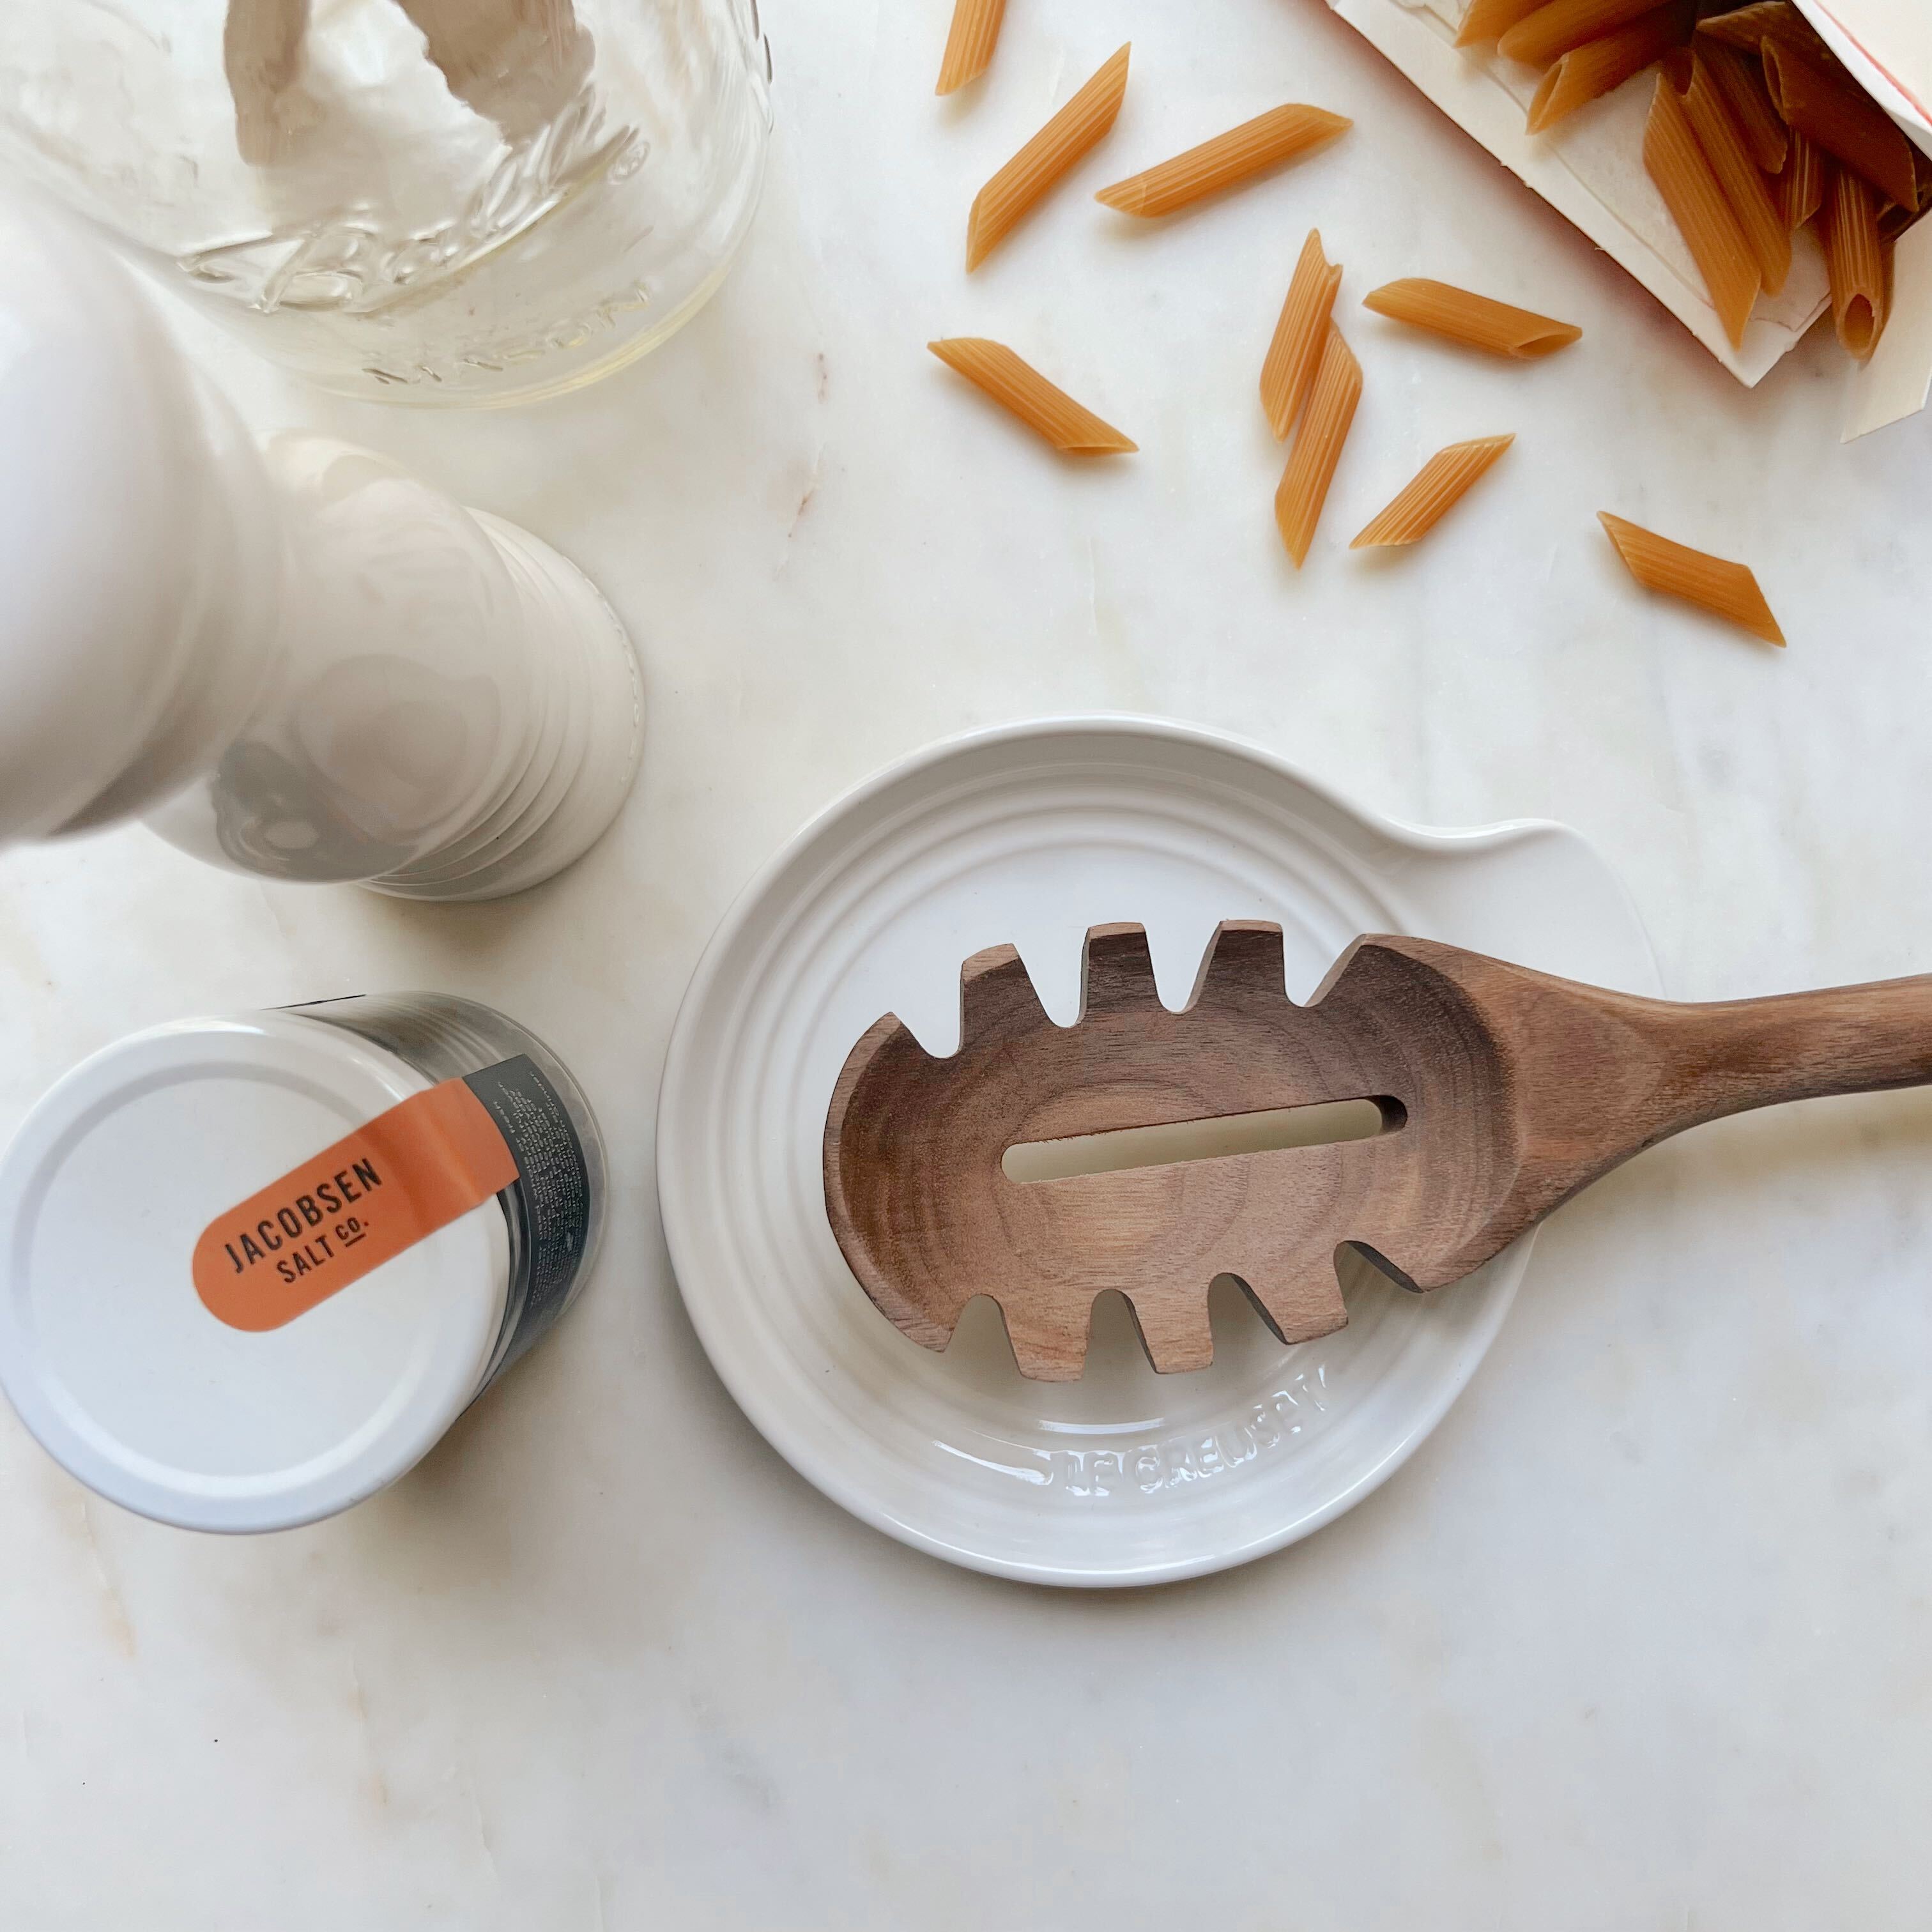 A black walnut pasta spoon laying on a white ceramic Le Creuset spoon rest next to Banza pasta noodles spilling out of their package on a white marble counter.